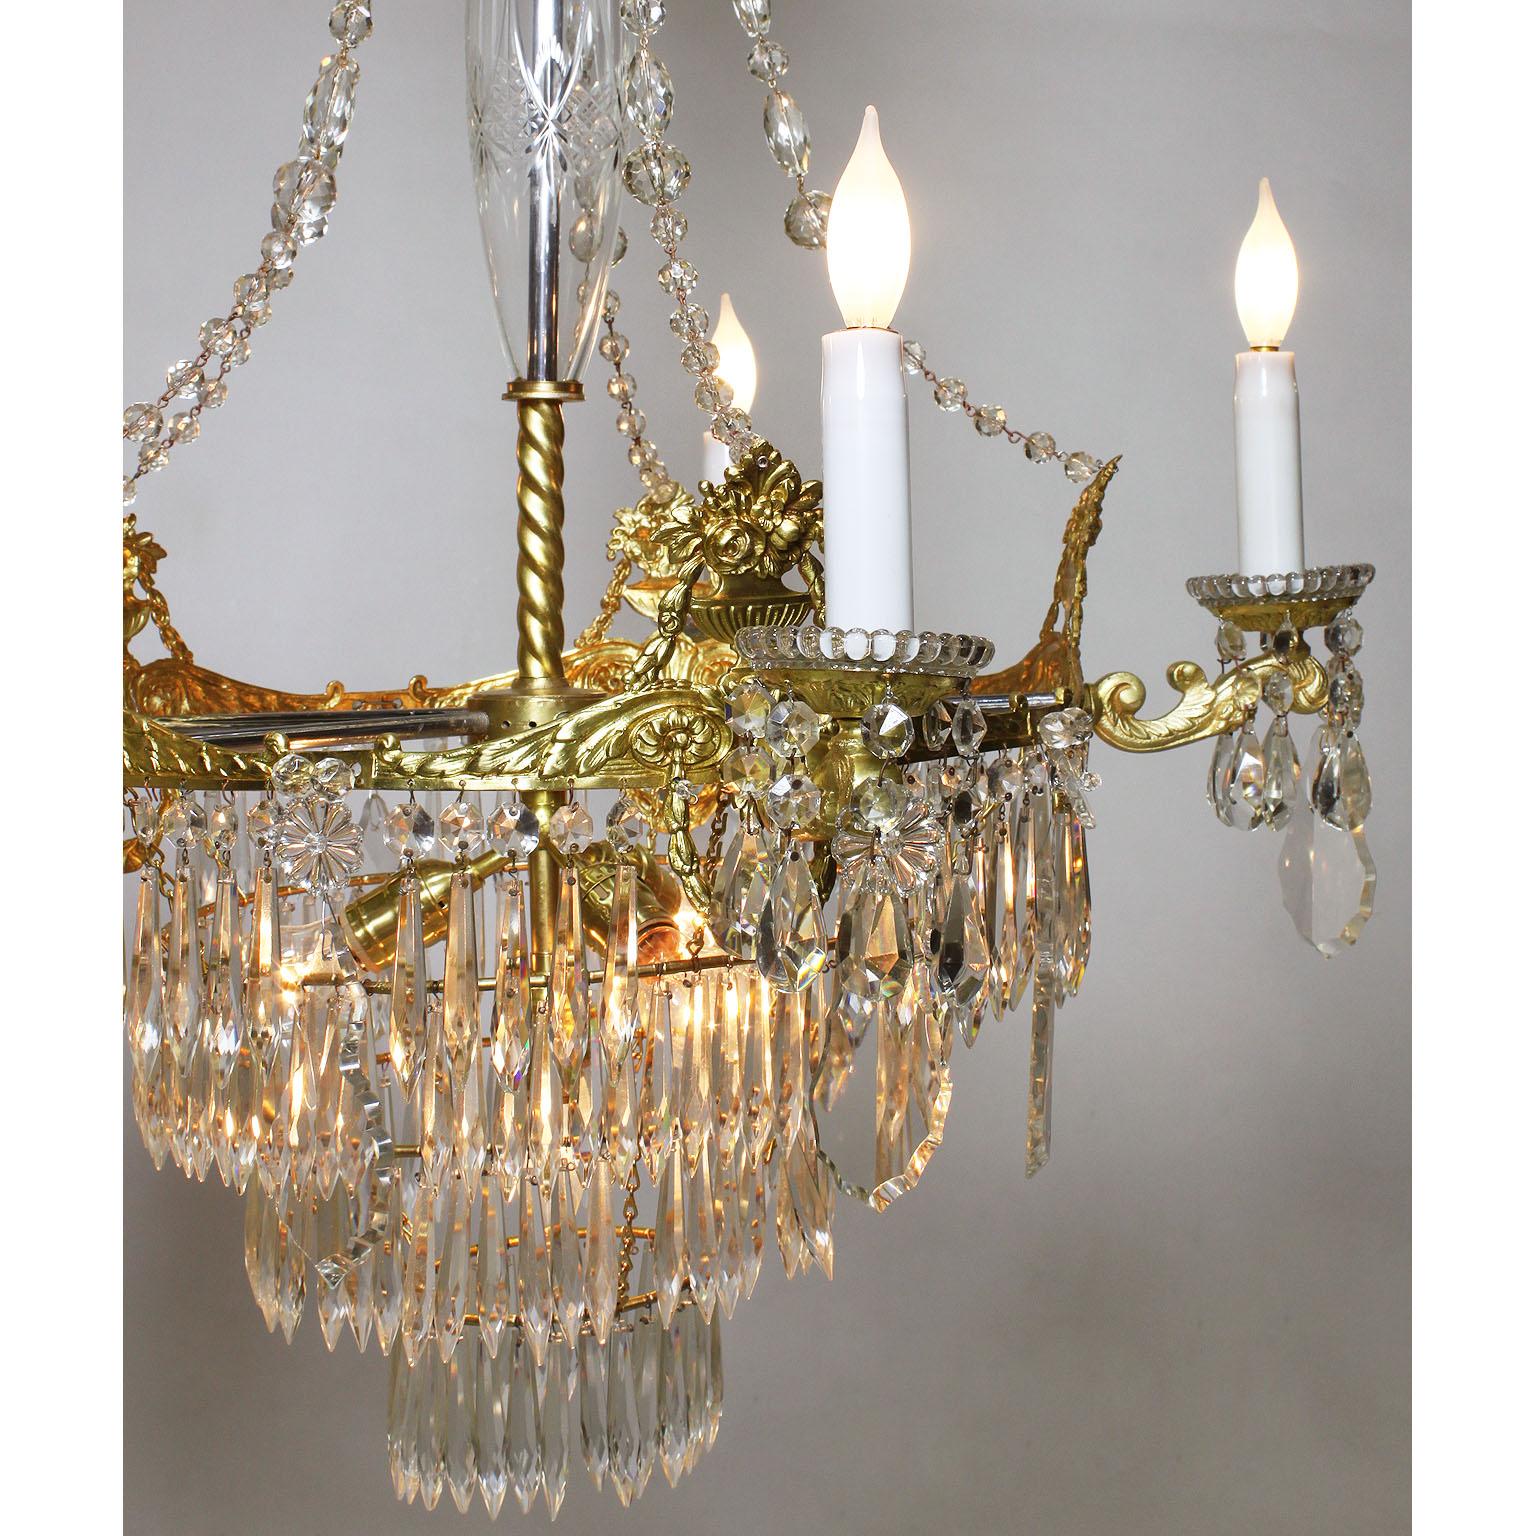 Early 20th Century French 19th Century Neoclassical Revival Style Gilt-Metal & Cut-Glass Chandelier For Sale